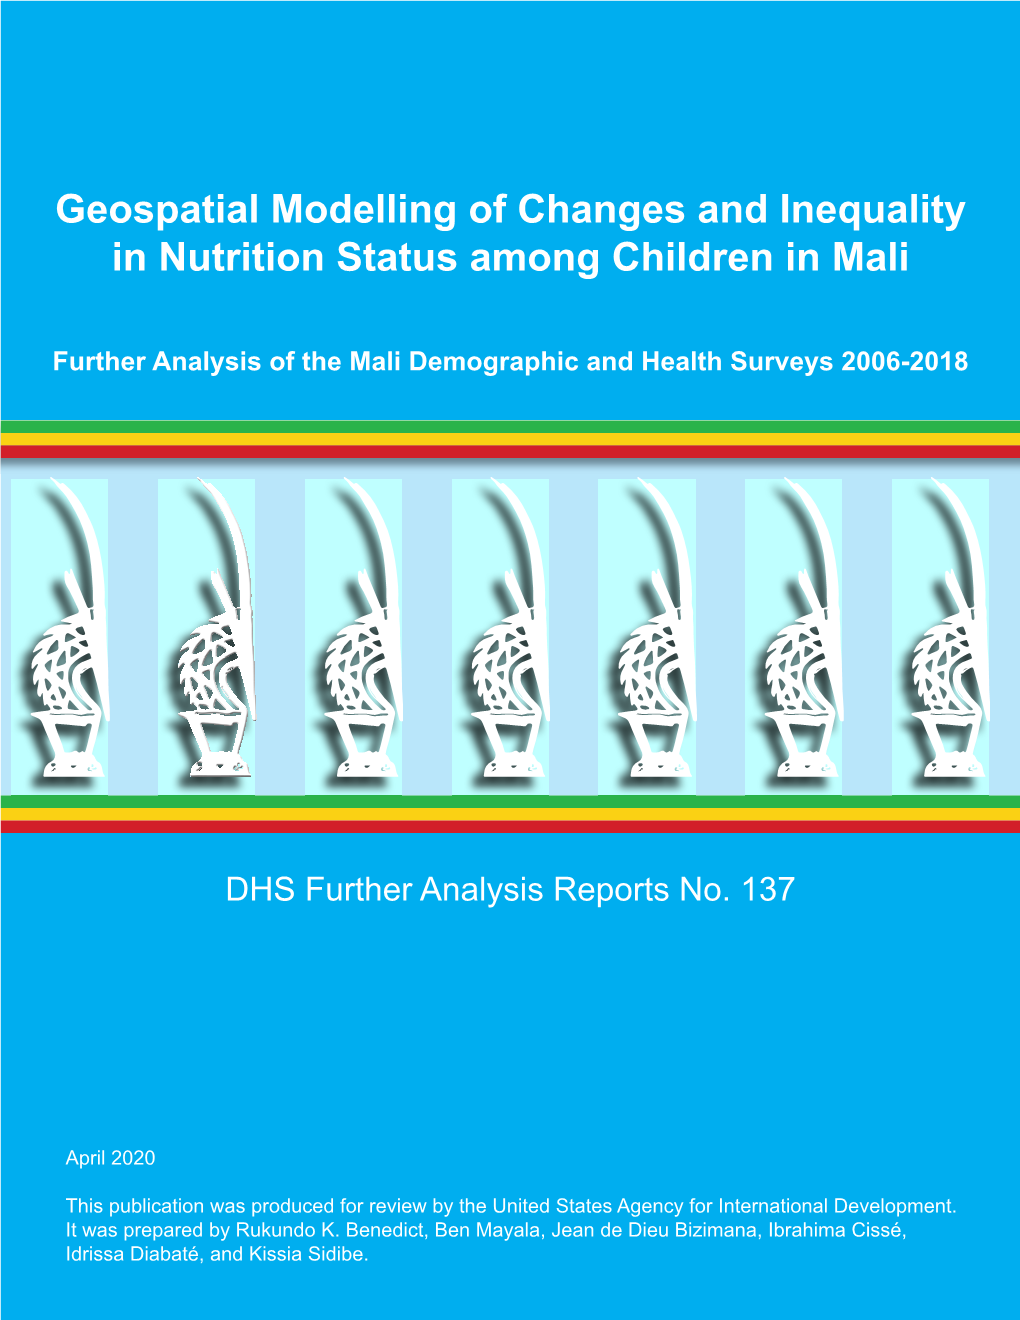 Geospatial Modelling of Changes and Inequality in Nutrition Status Among Children in Mali